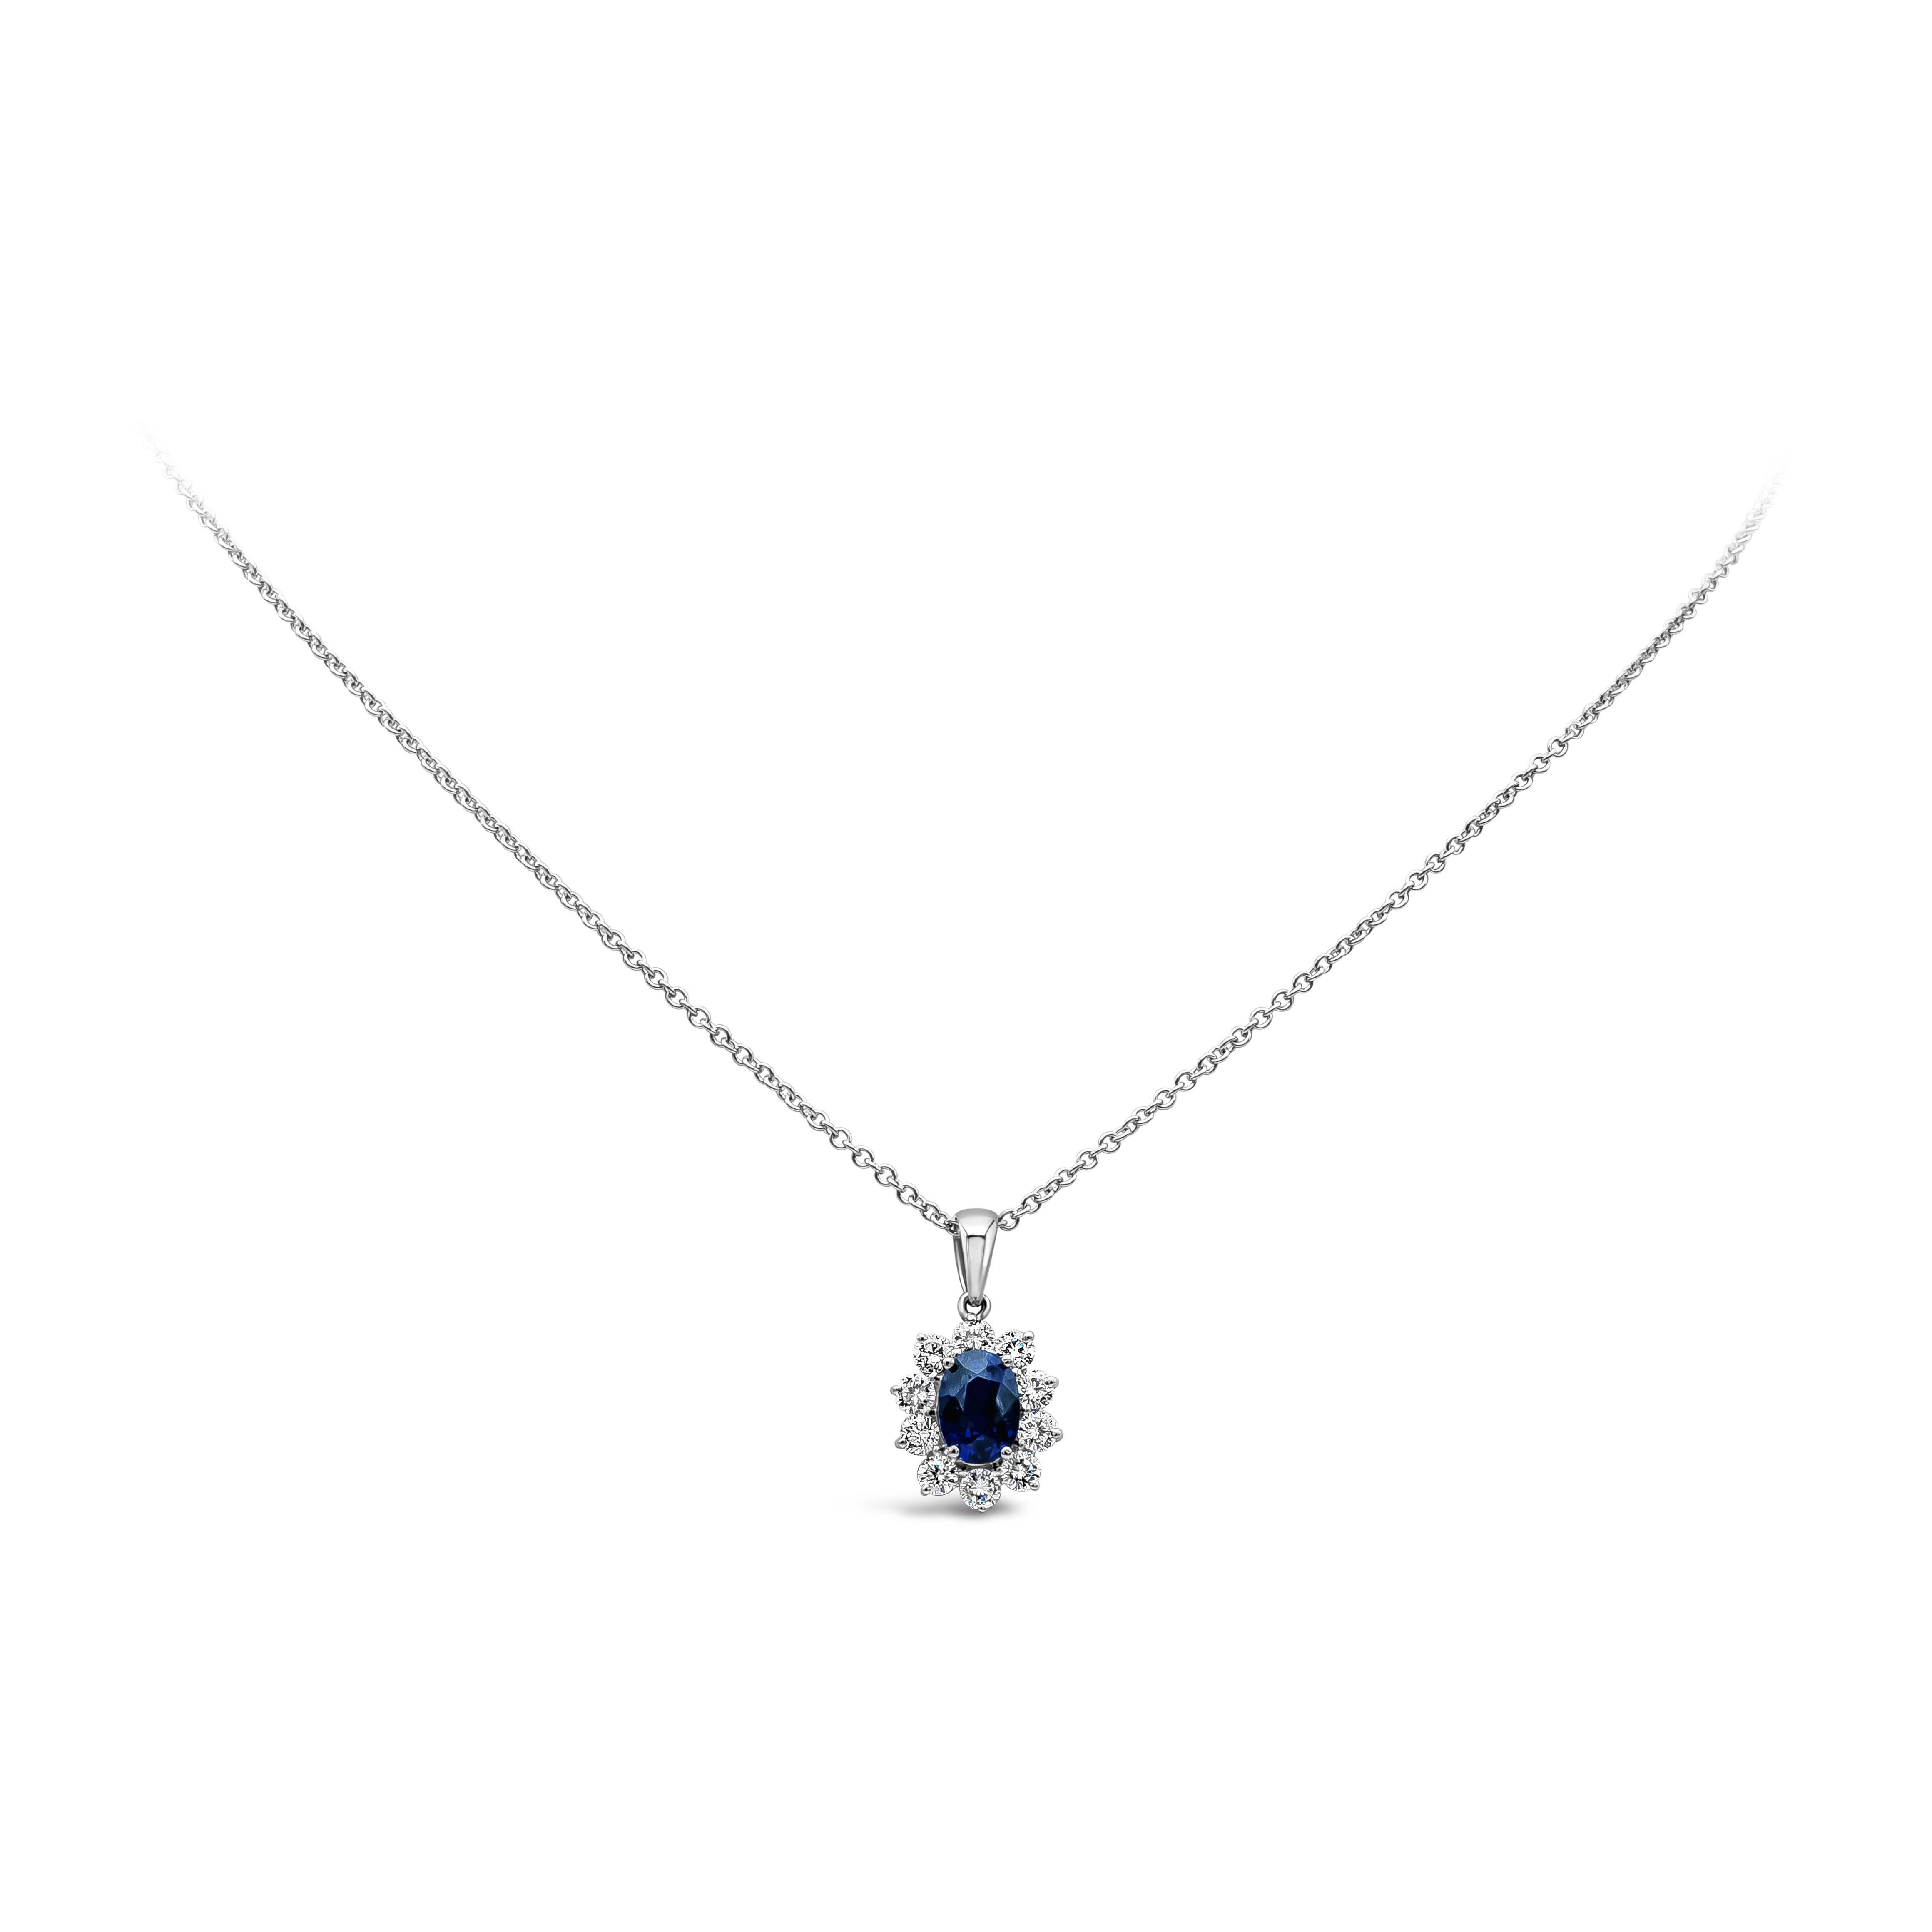 A beautiful pendant necklace showcasing a 1.90 Carat Oval Shape Blue Sapphire Center Stone, surrounded by 10 round brilliant diamonds that weighs 0.88 carats in total, F-G color, VS/SI clarity, and set in 18k White Gold.

Style available in